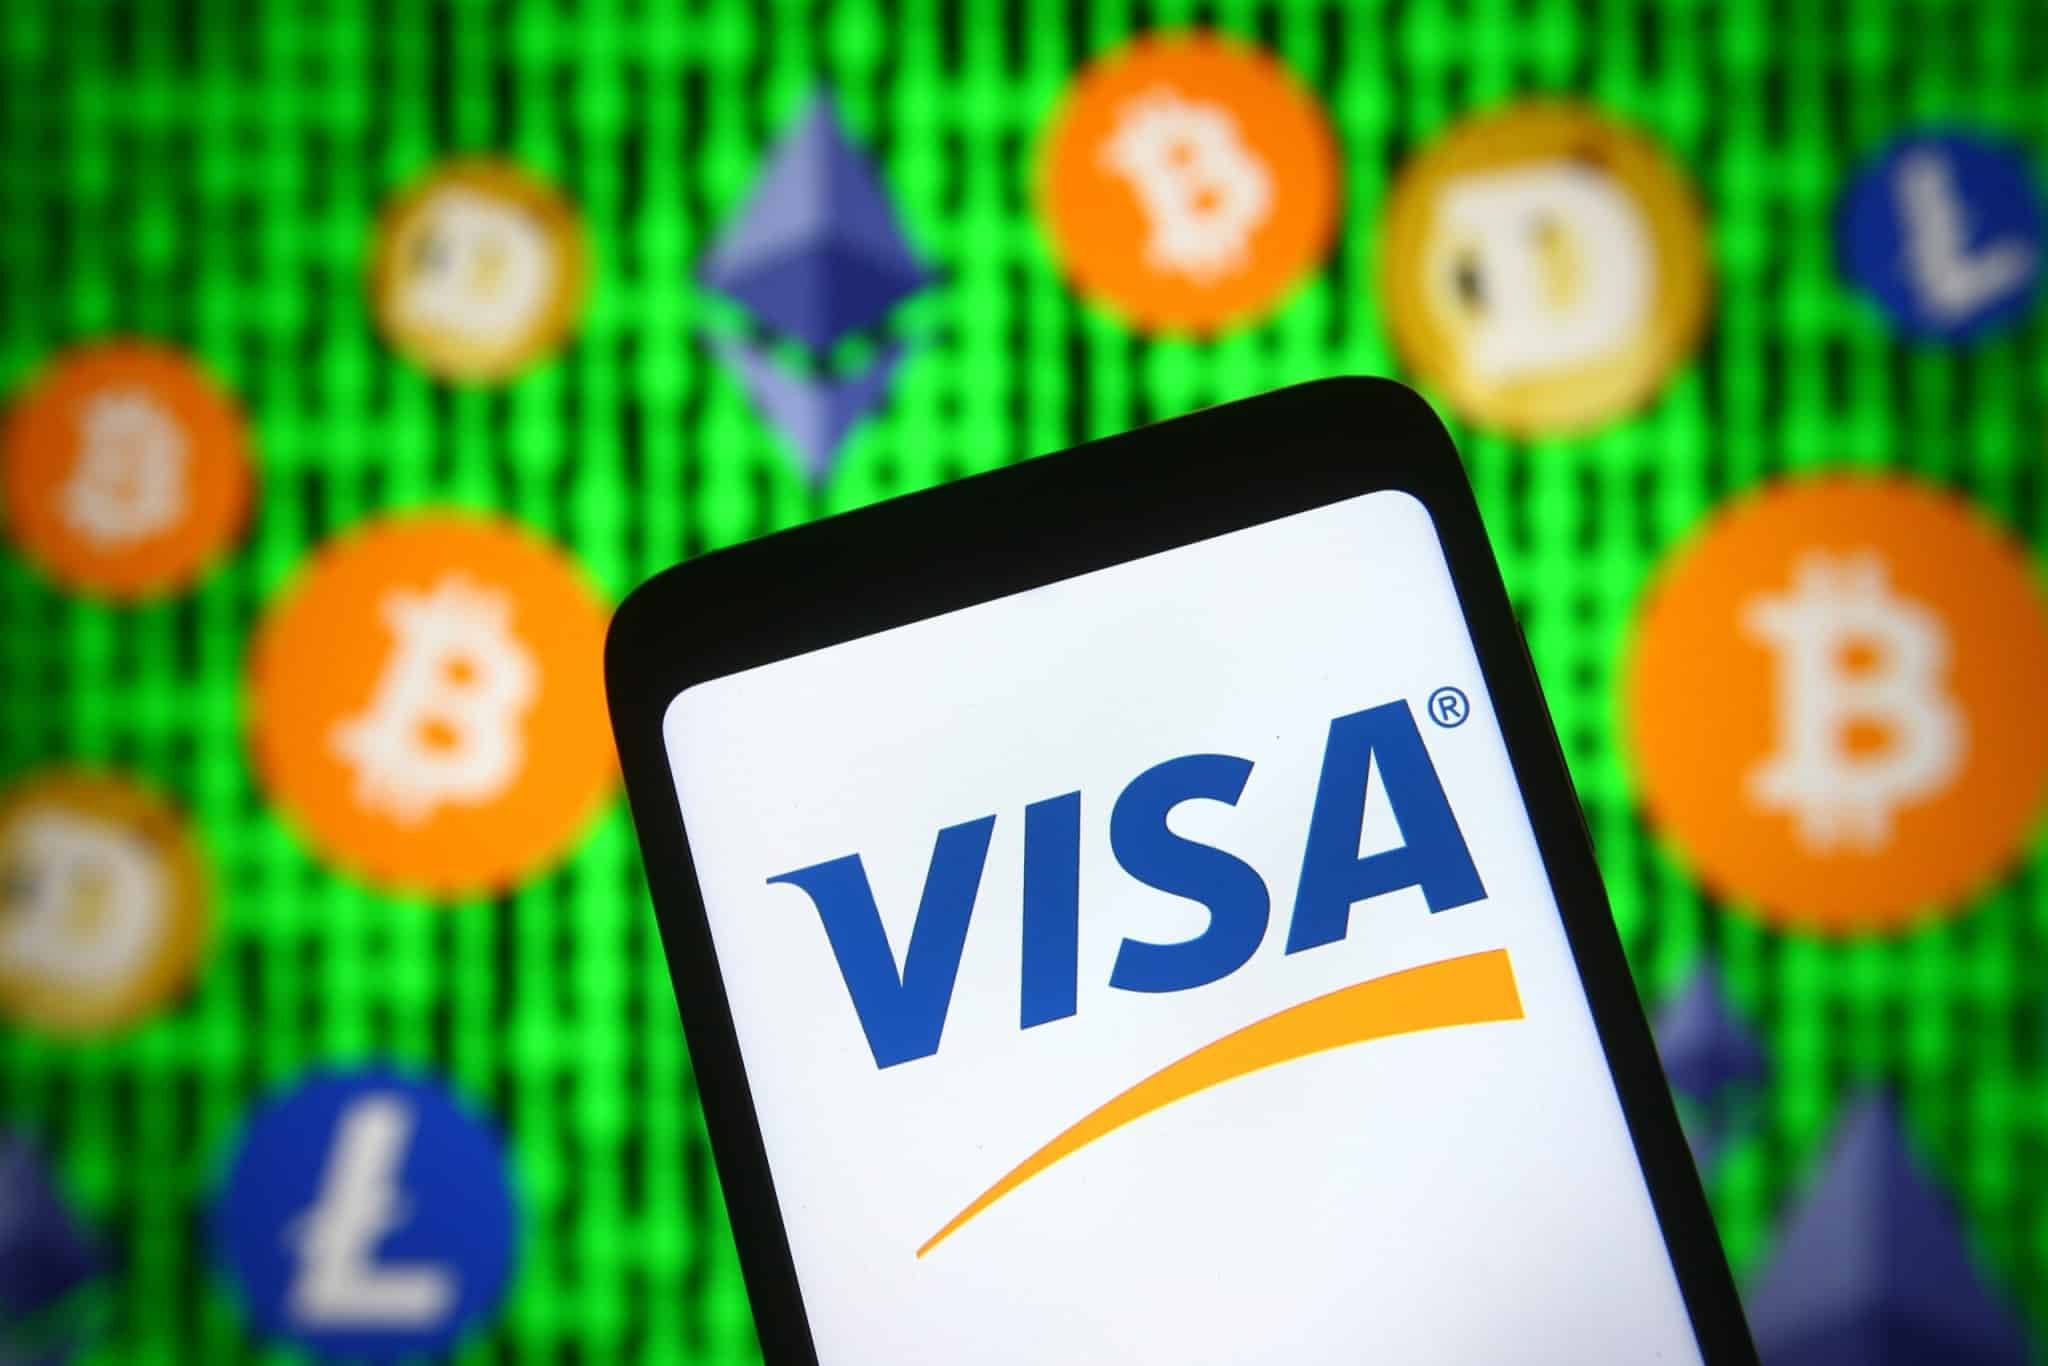 Visa To Introduce Cryptocurrency Payments For Latin Americans In Collaboration With Tribal